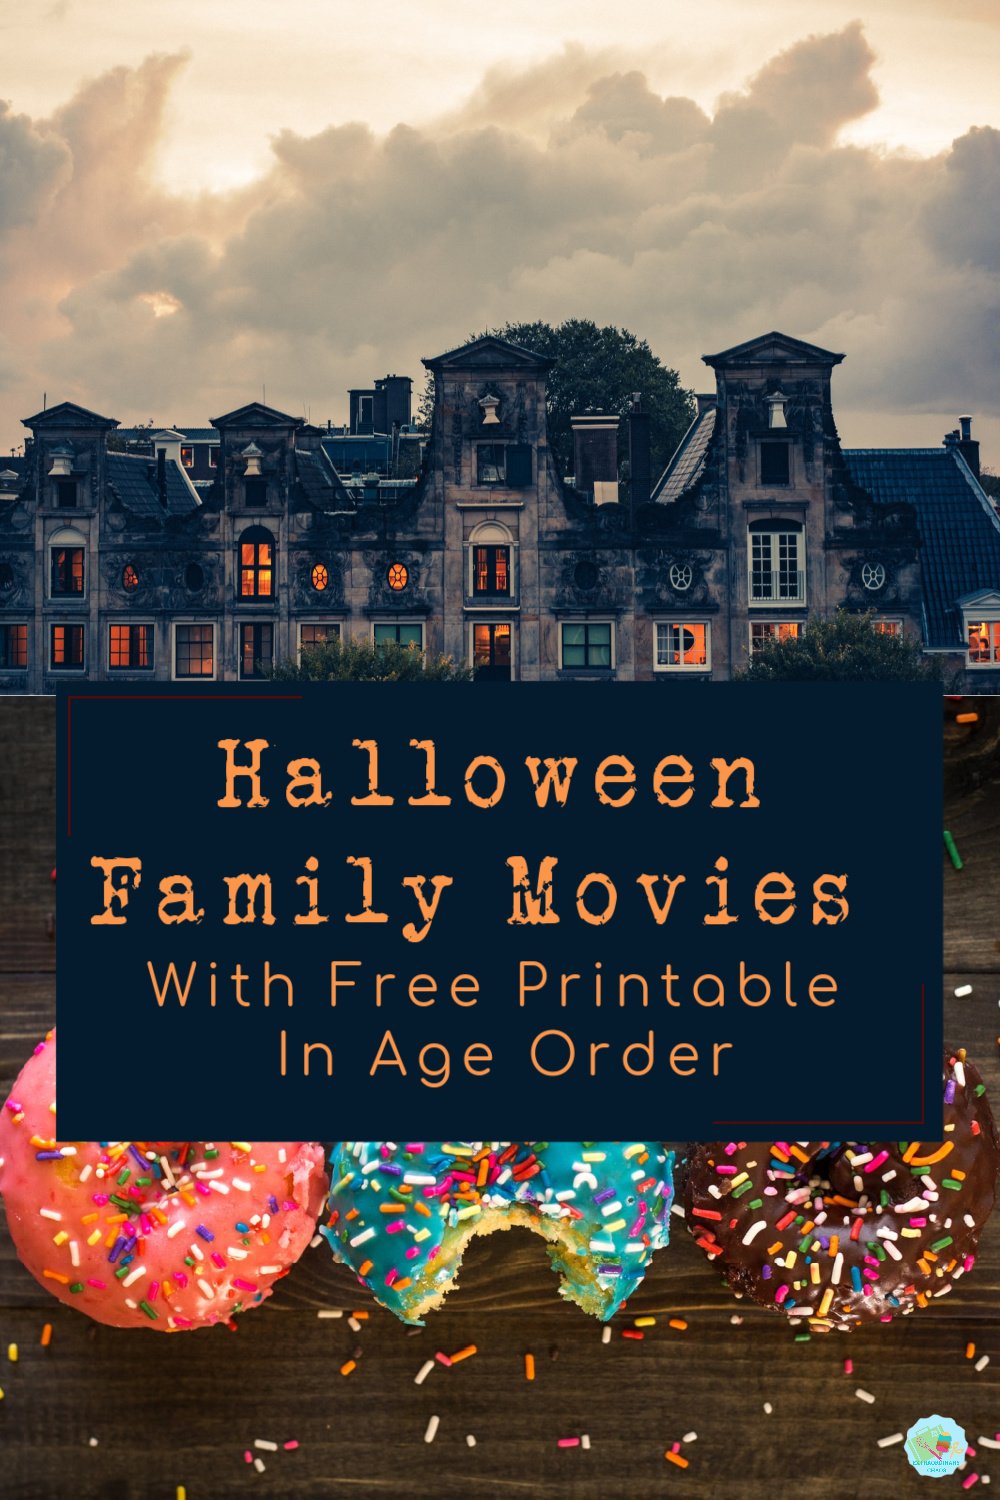 The best Halloween Movies for families with Free Printable to download and keep in age order